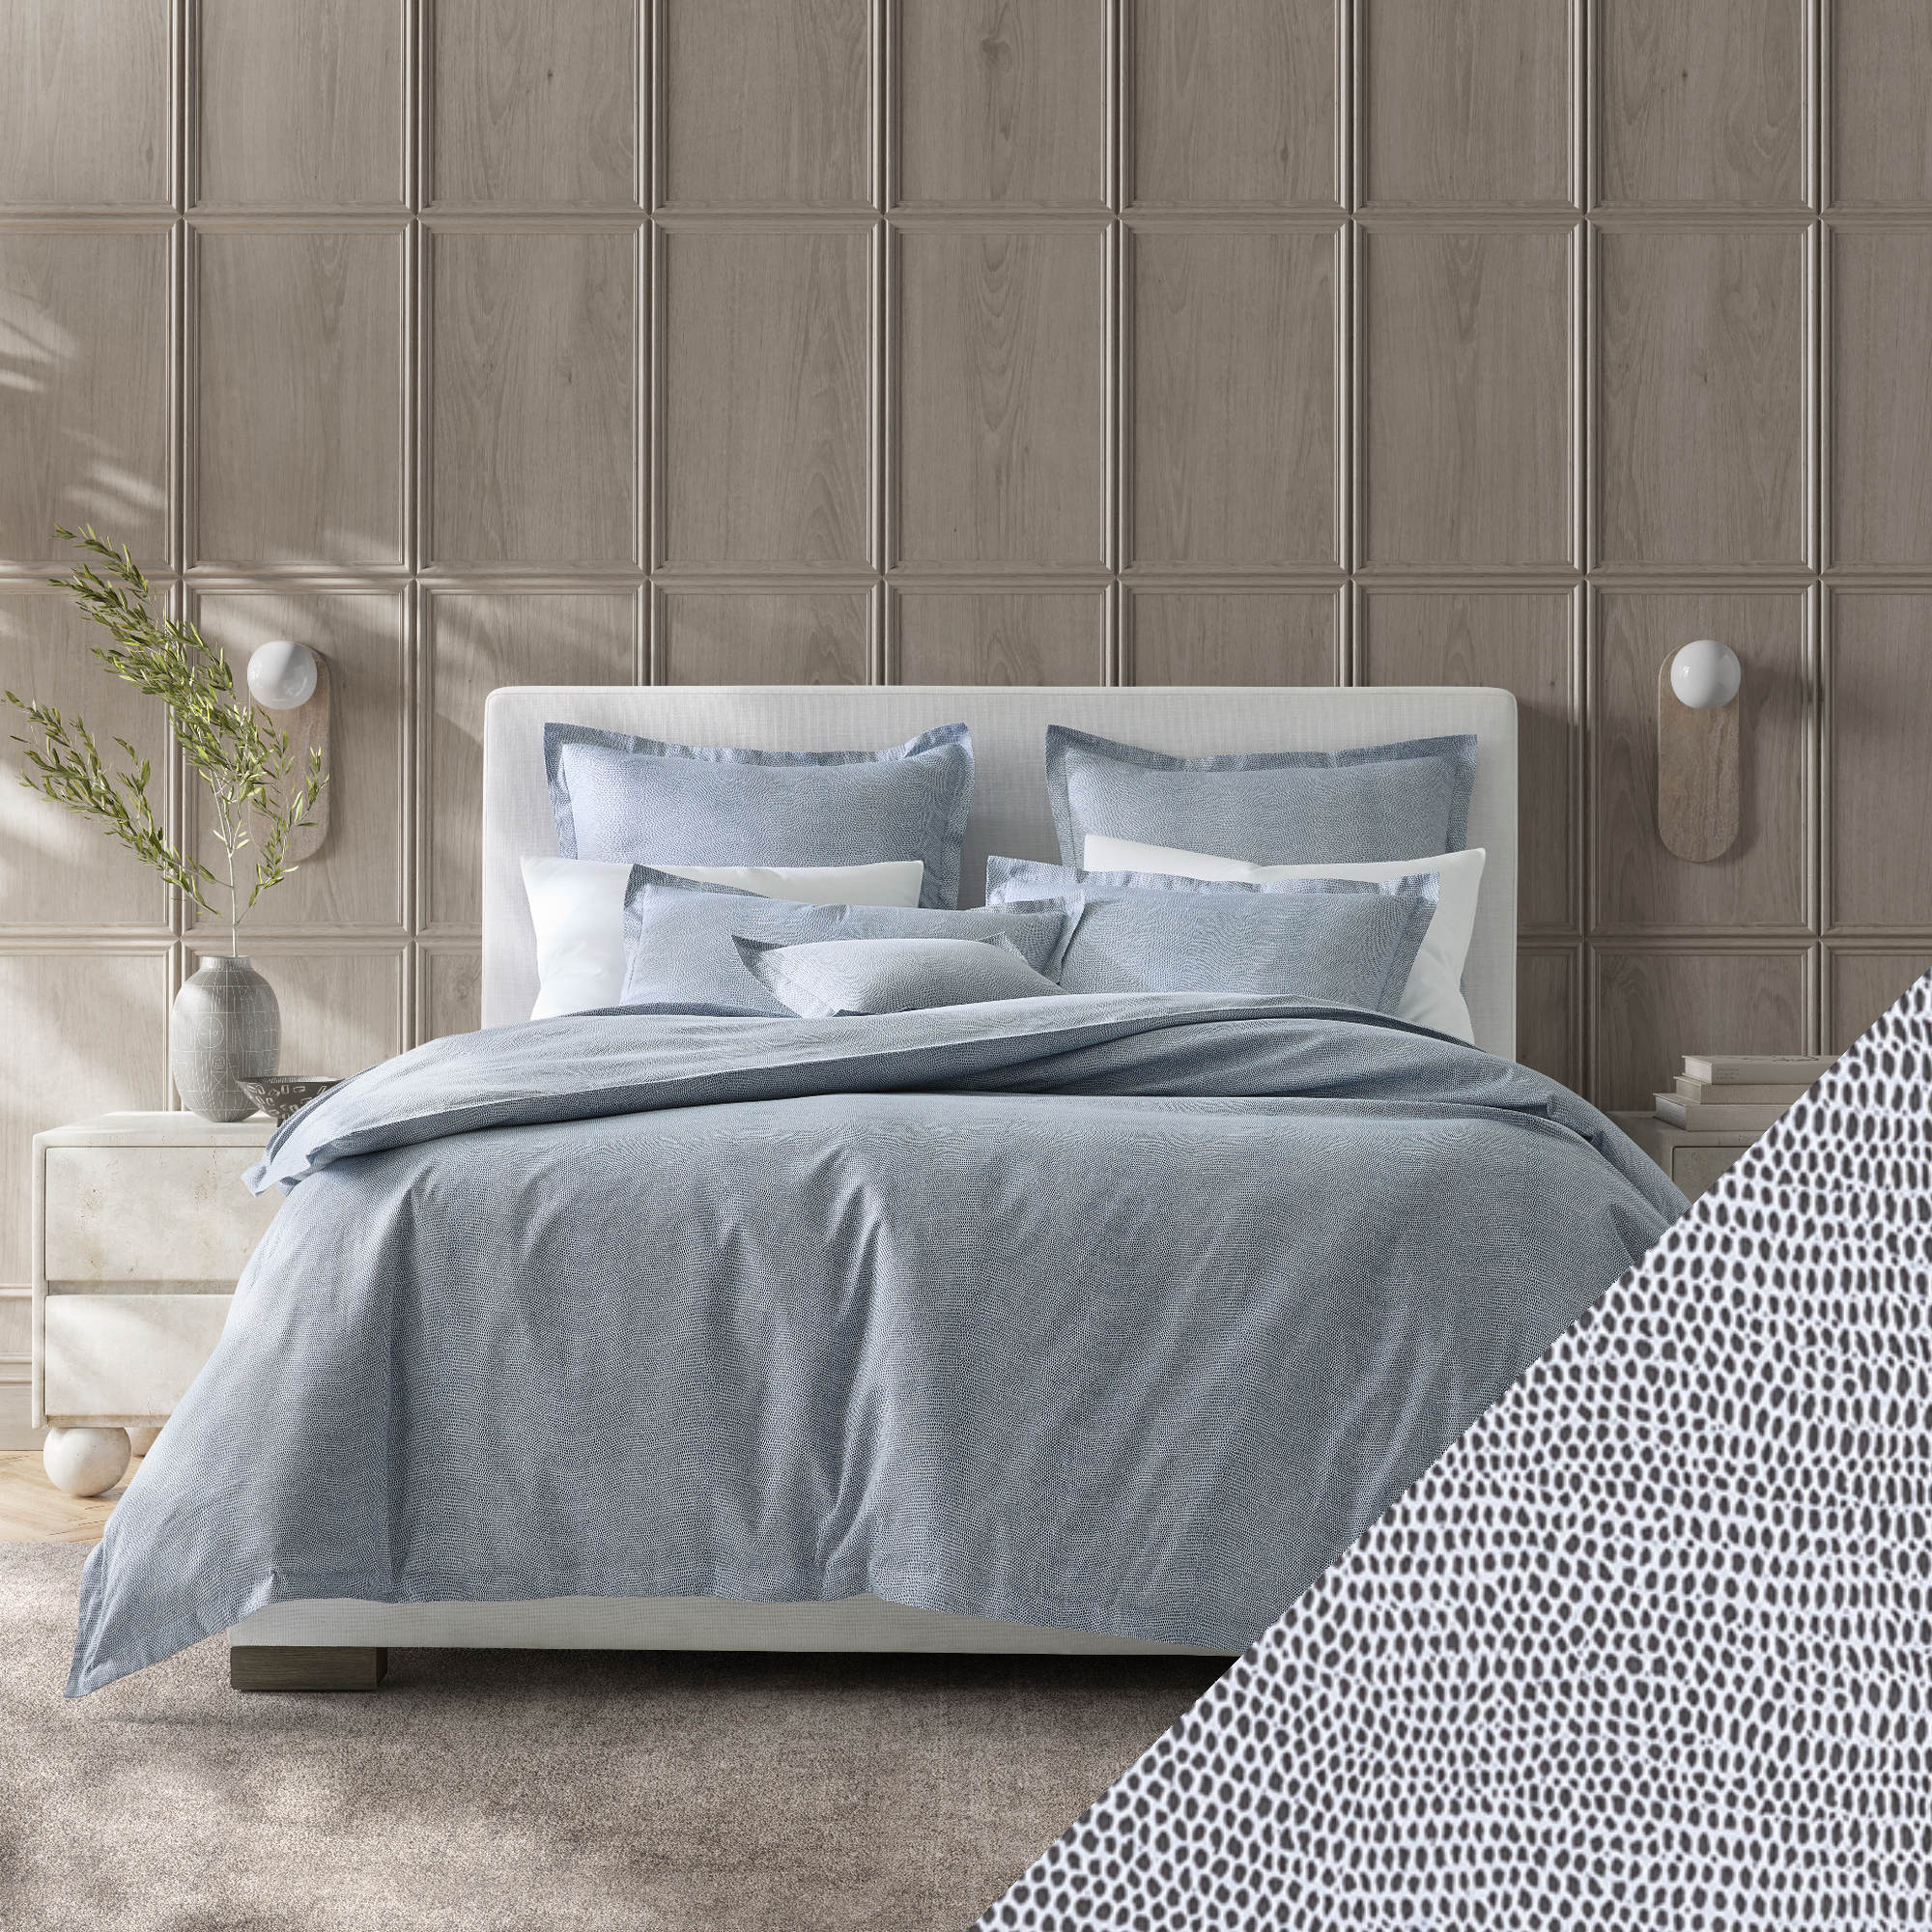 Full Bed Dressed in Steel Blue Matouk Jasper Bedding with Charcoal Swatch